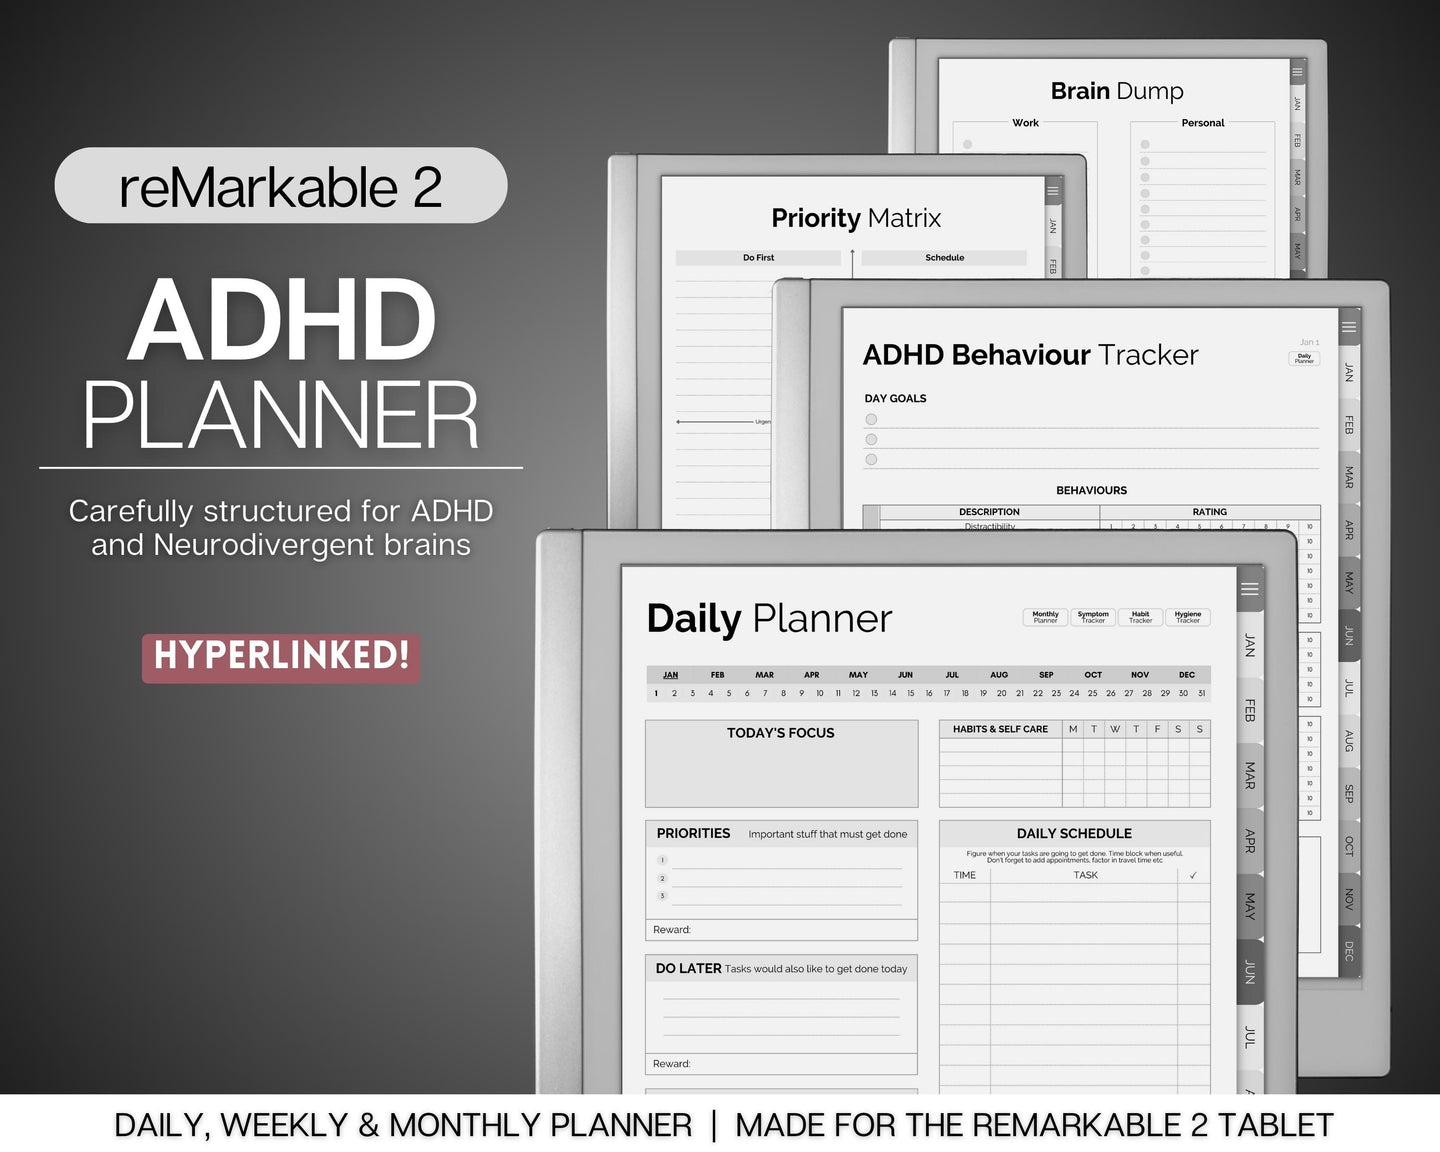 reMarkable 2 ADHD Digital Planner - Daily Planner for Neurodivergent Adults | Brain Dump Template, To Do List, Cleaning & Symptom Tracker